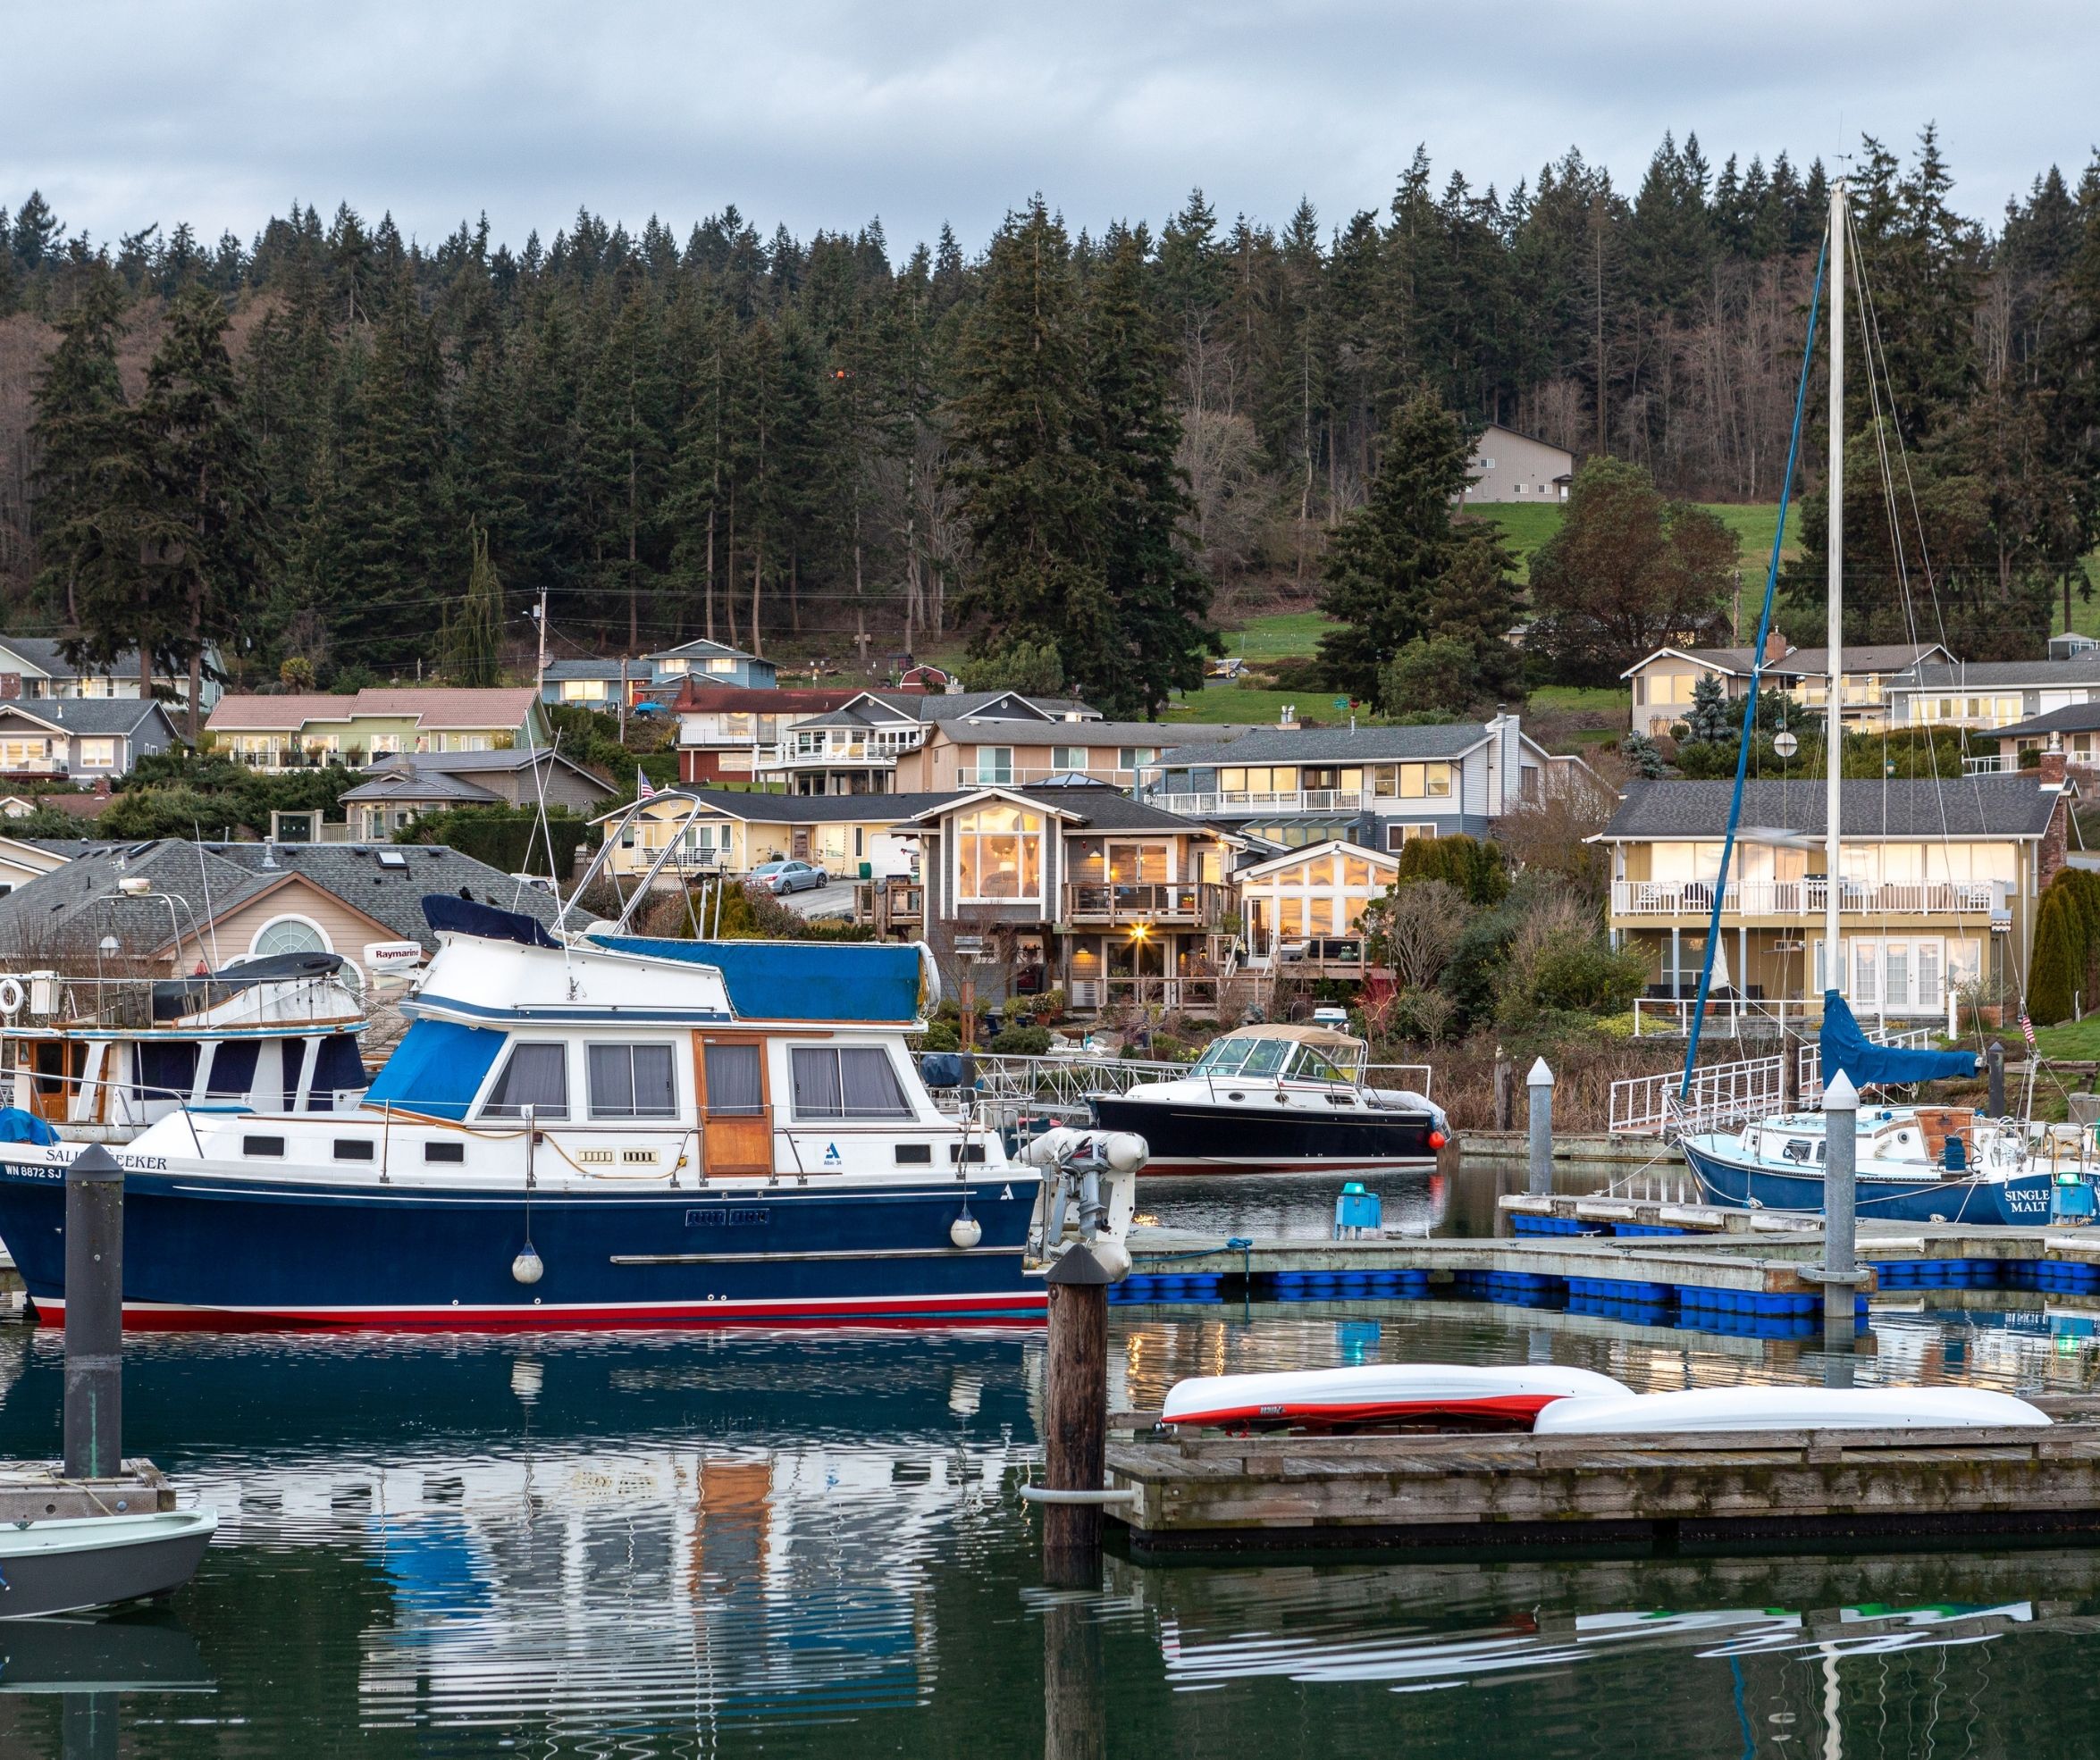 Sailing life, Boating, Dock your boat, Waterfront lifestyle, home at sea, dock in your back yard, Whidbey Island life, Luxury lifestyle, made foe you